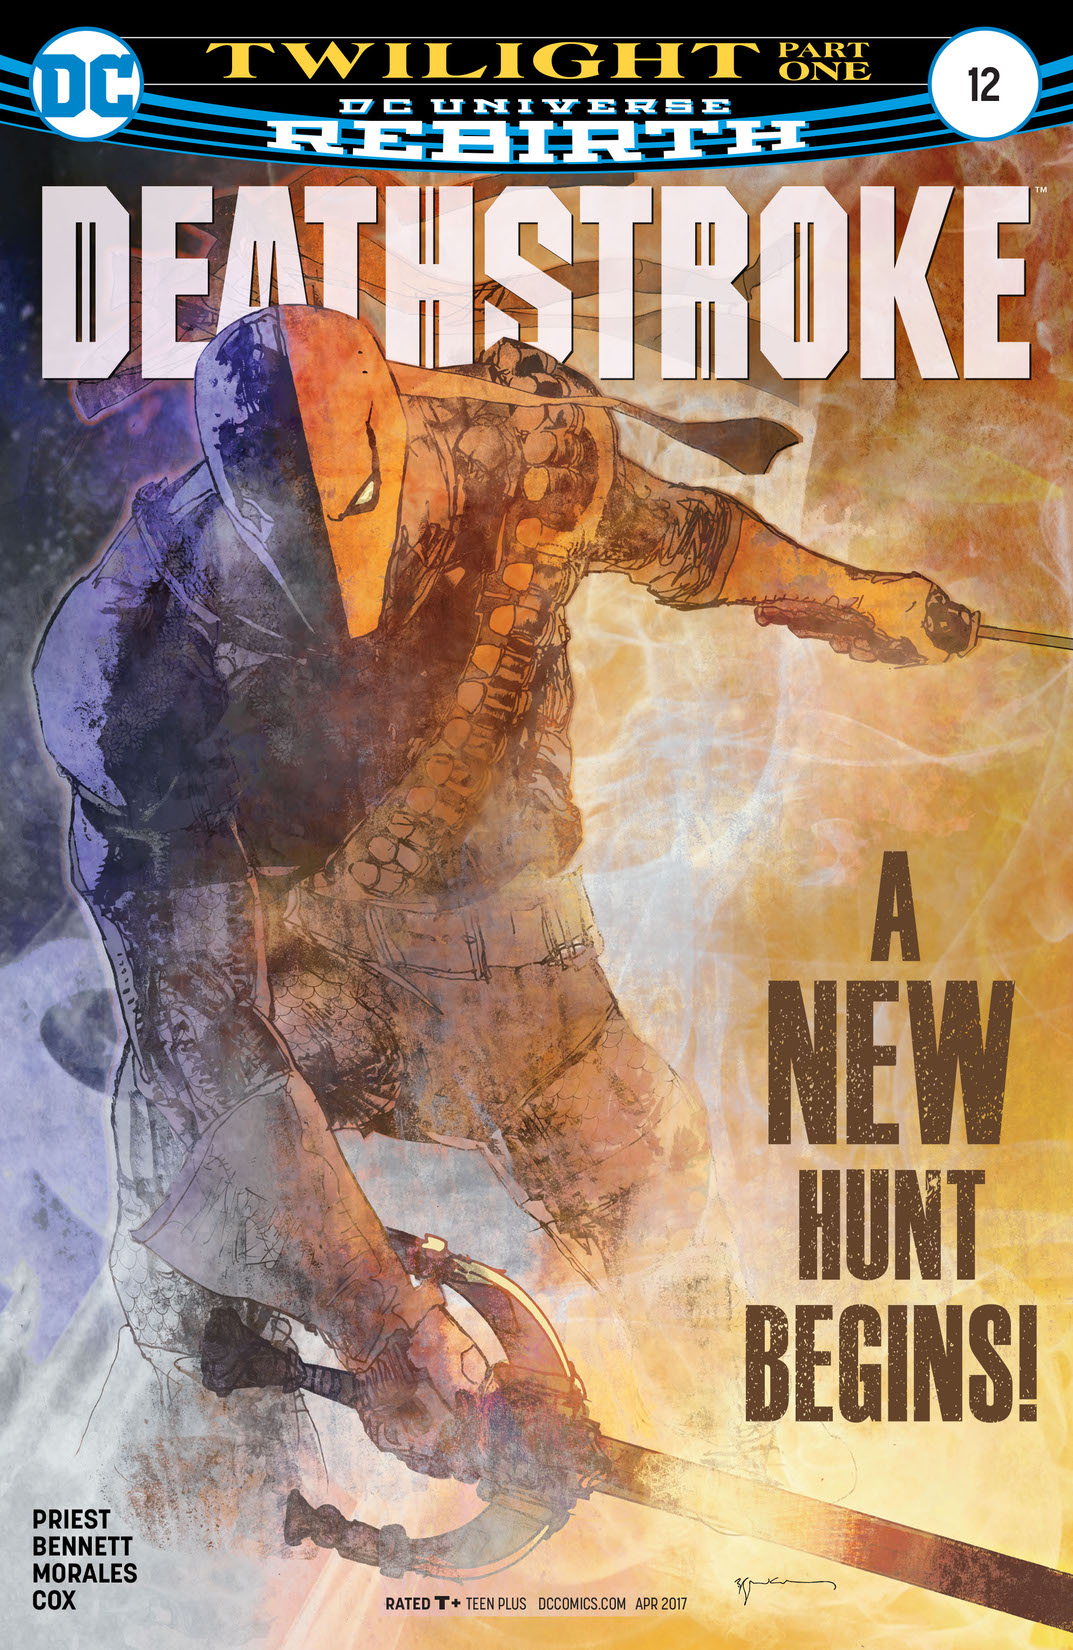 Deathstroke (2016-) #12 preview images